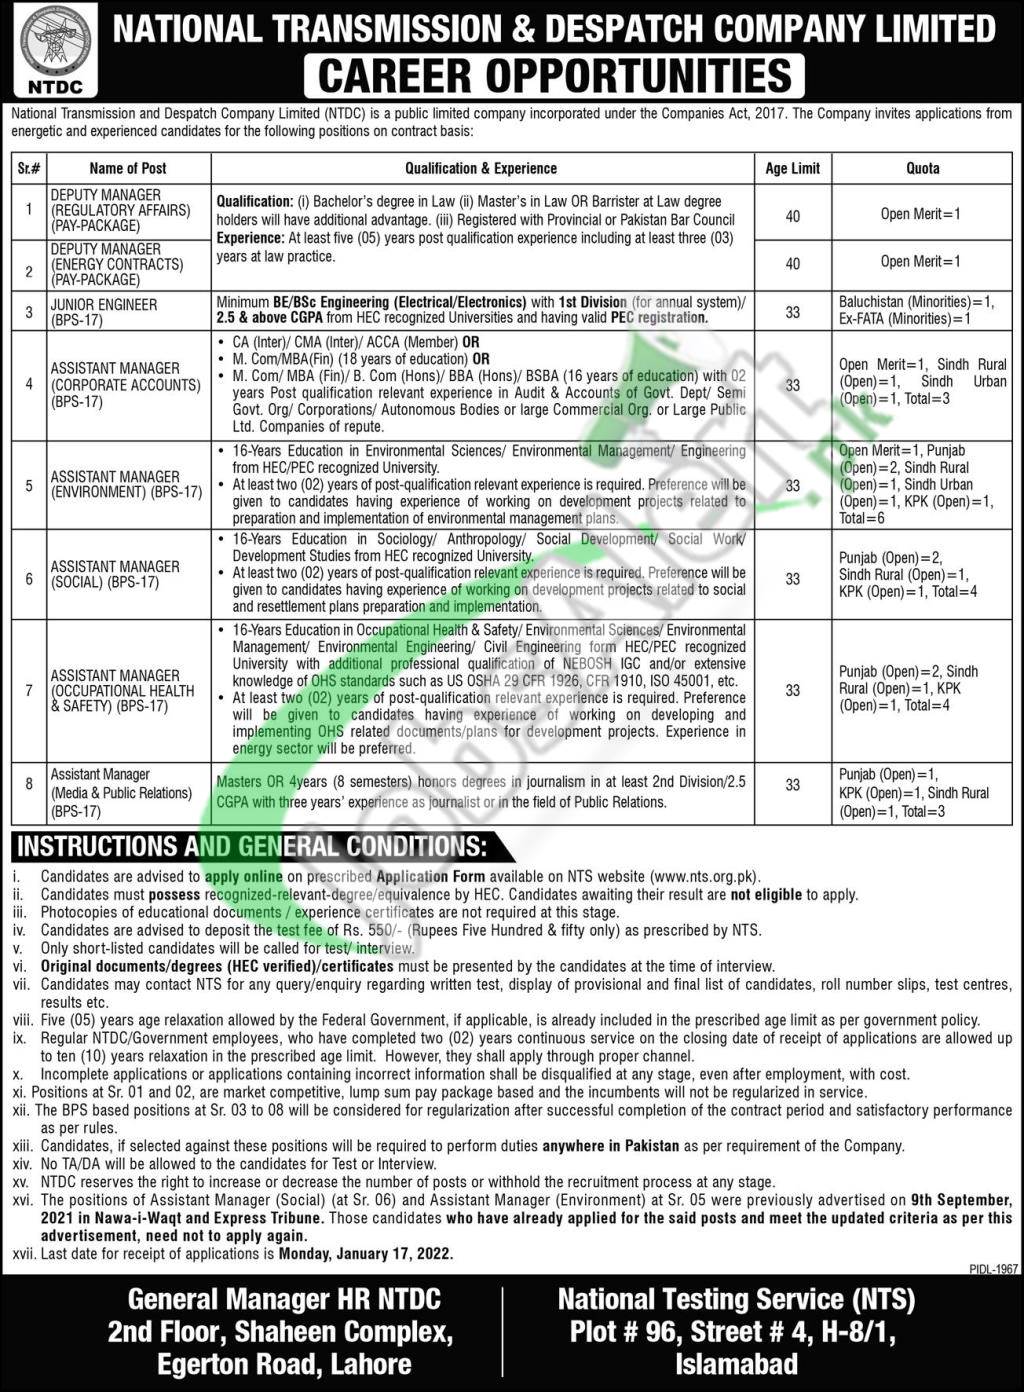 National Transmission & Dispatch Company Limited Jobs